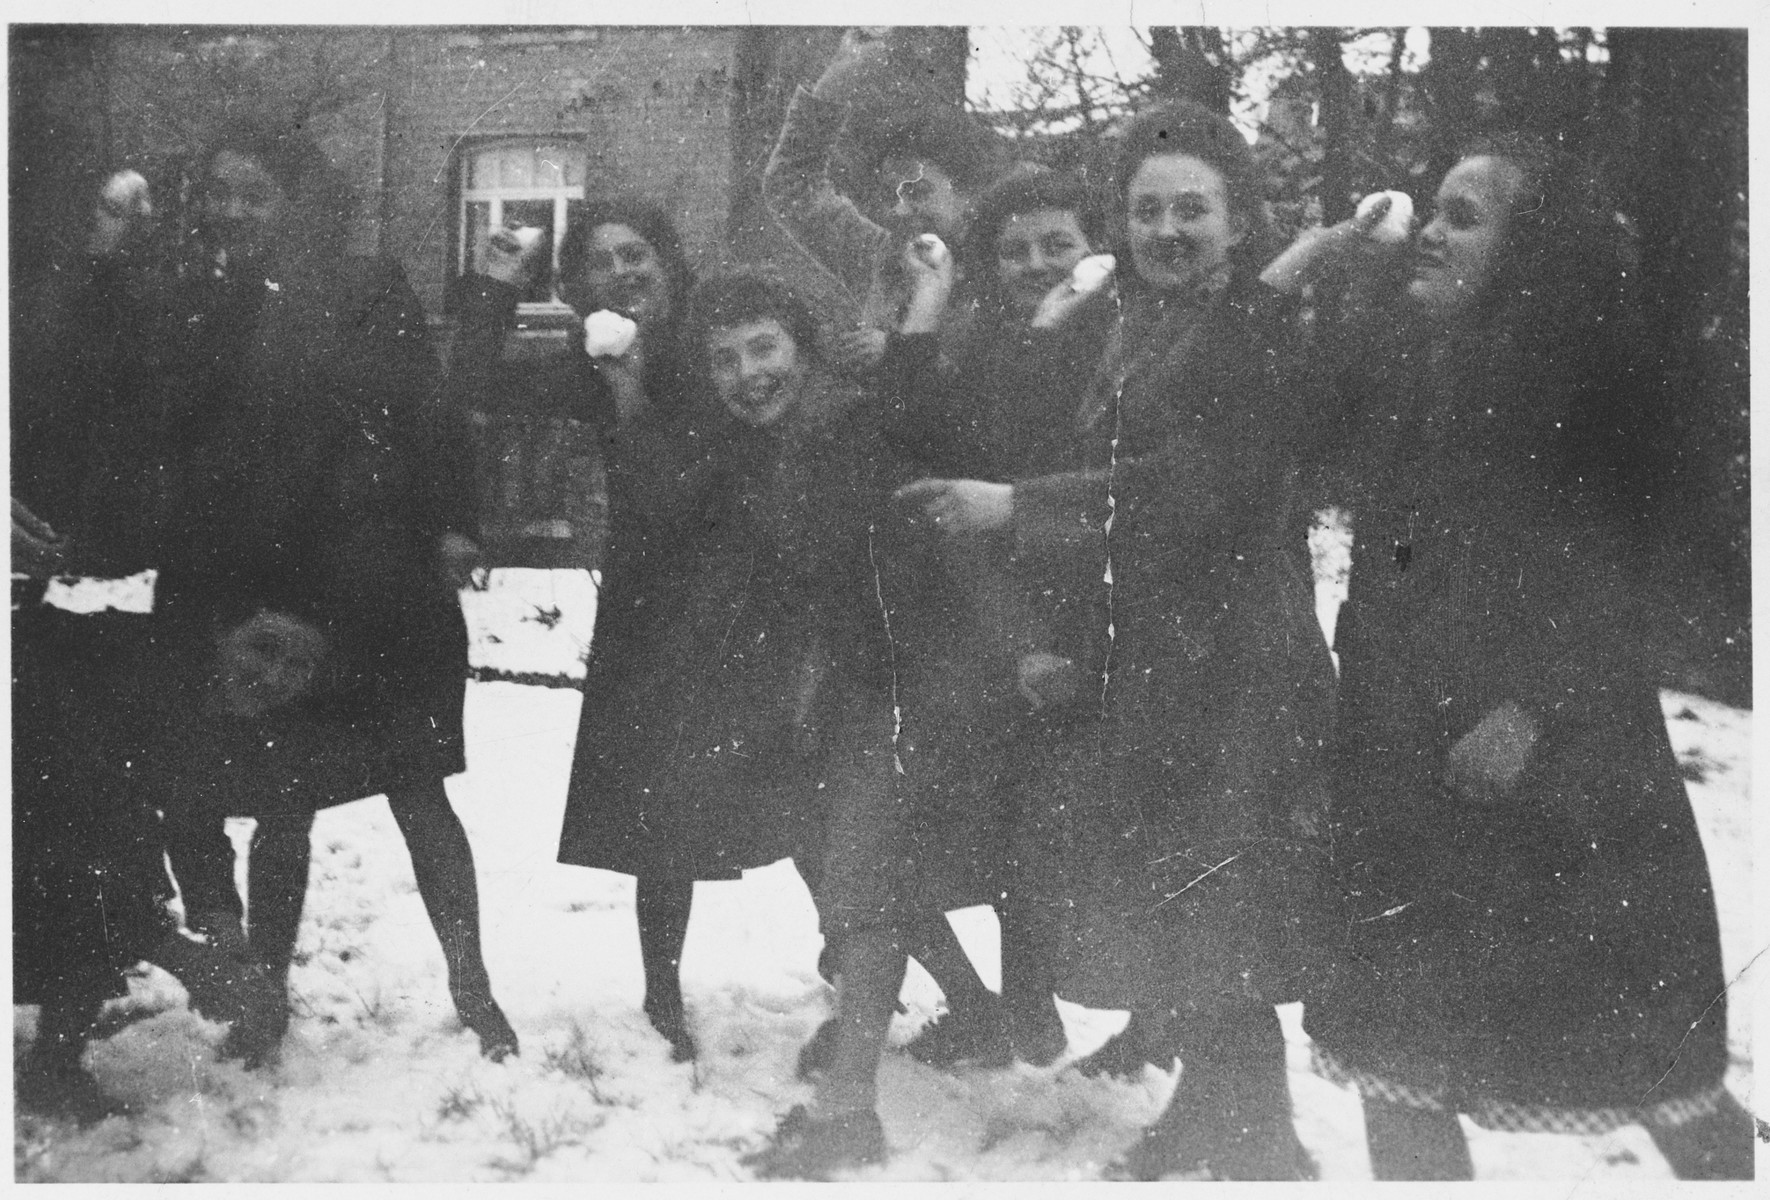 A group of Jewish girls who are living in hiding in Belgium, play in the snow.